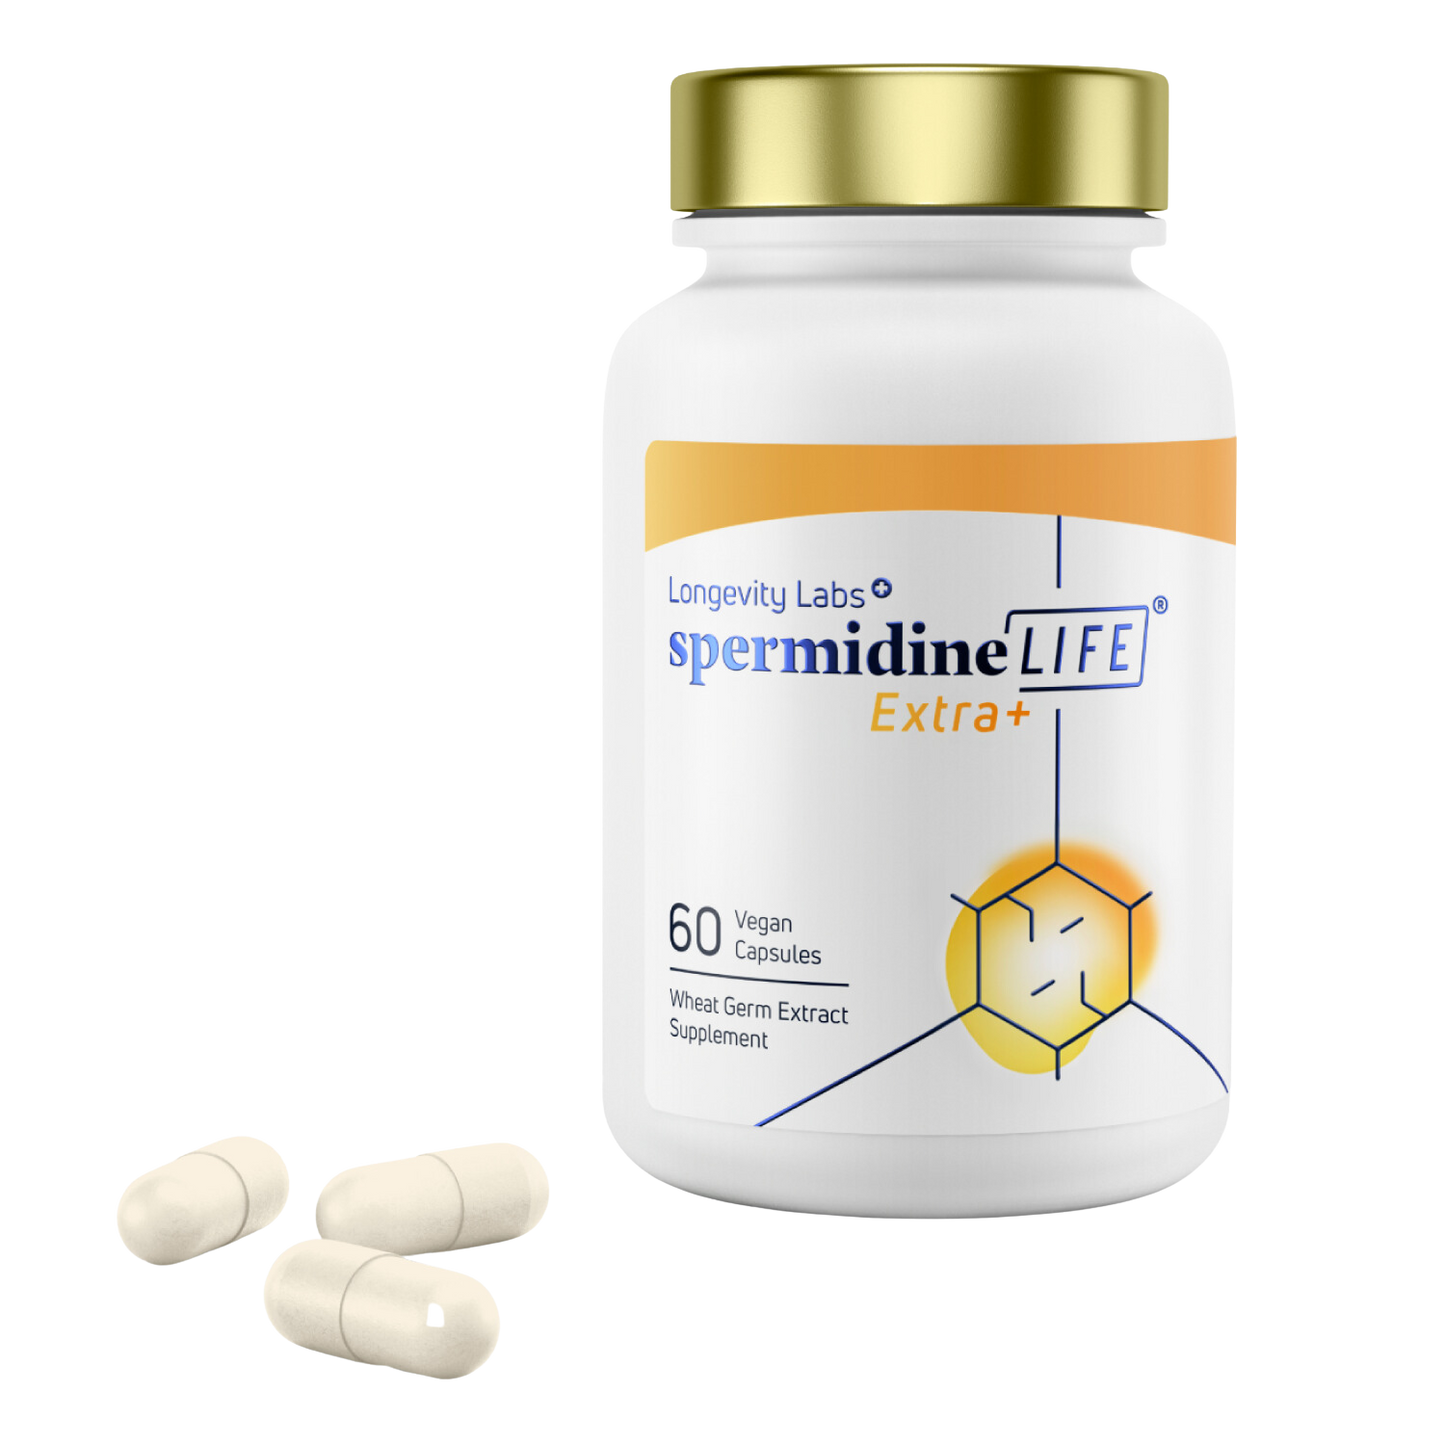 Bottle of spermidineLIFE® Extra + Pro Bundle supplement by Longevity Labs, Inc with two capsules displayed in front.